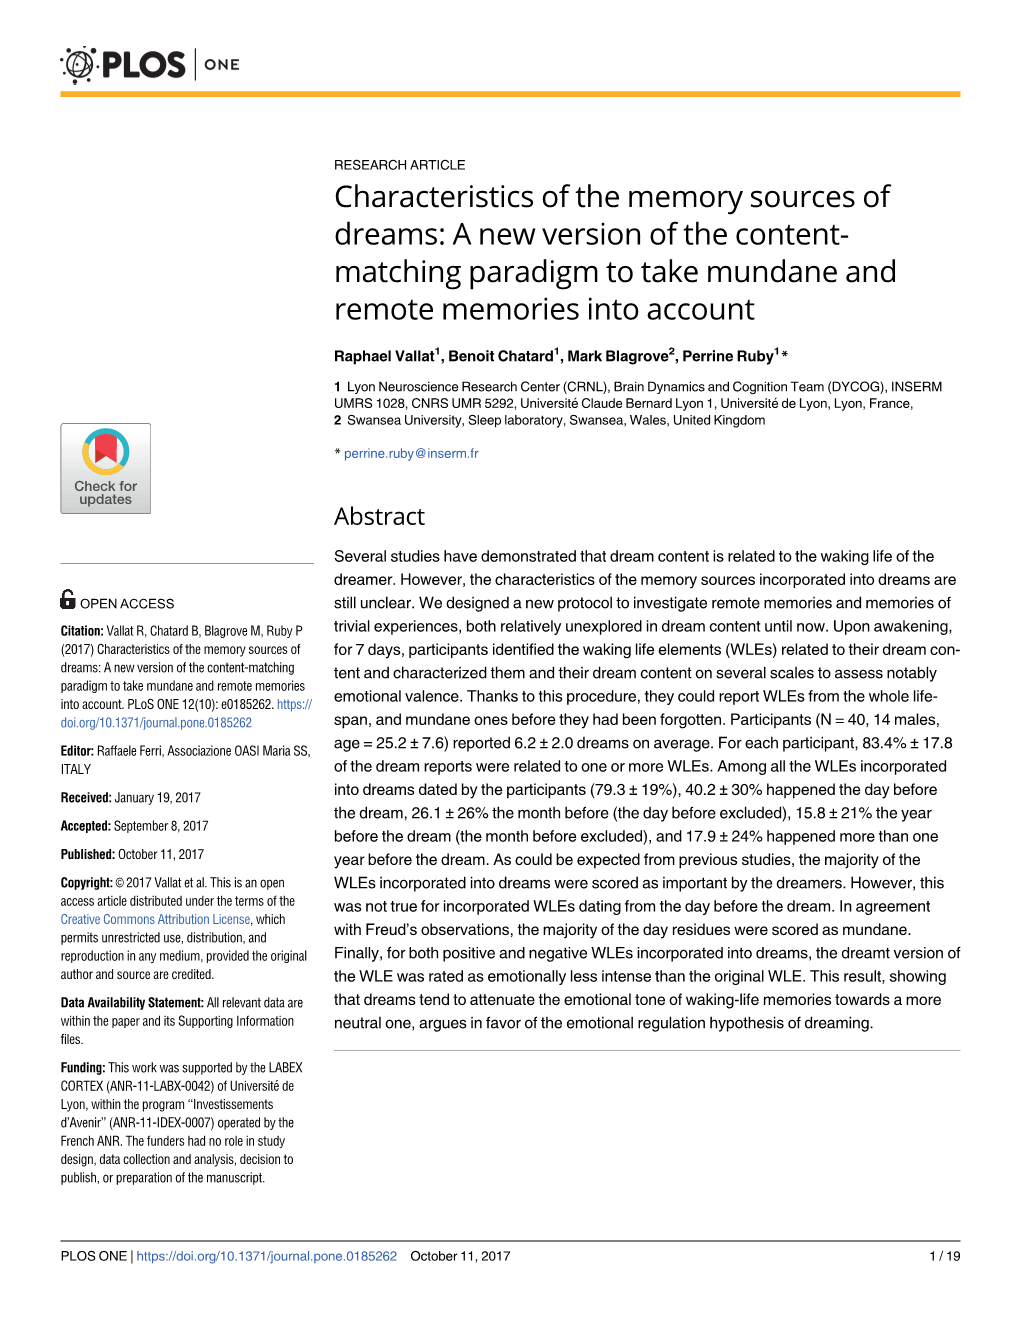 Characteristics of the Memory Sources of Dreams: a New Version of the Content- Matching Paradigm to Take Mundane and Remote Memories Into Account